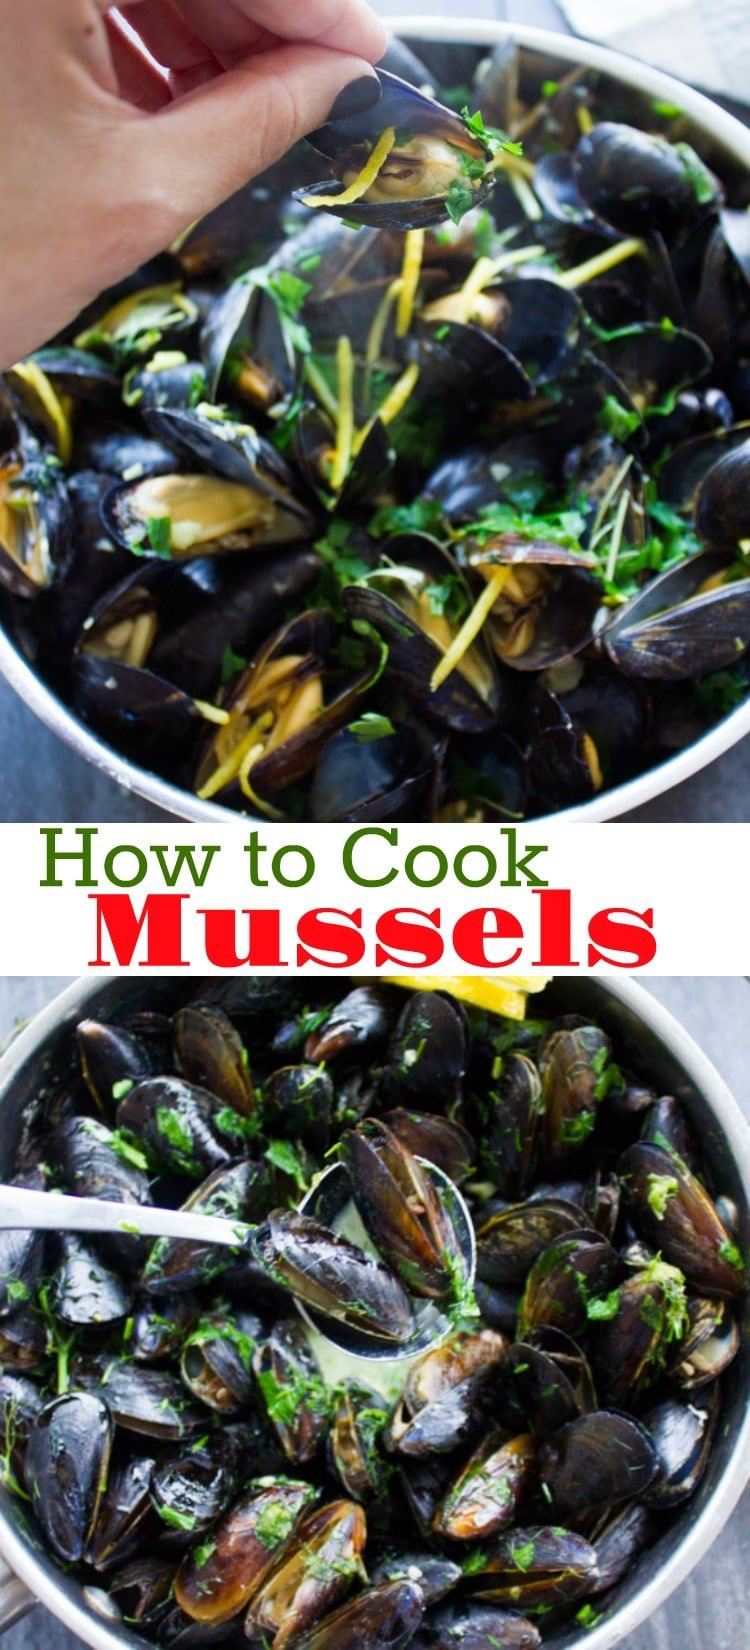 Mussels – How to Cook Mussels